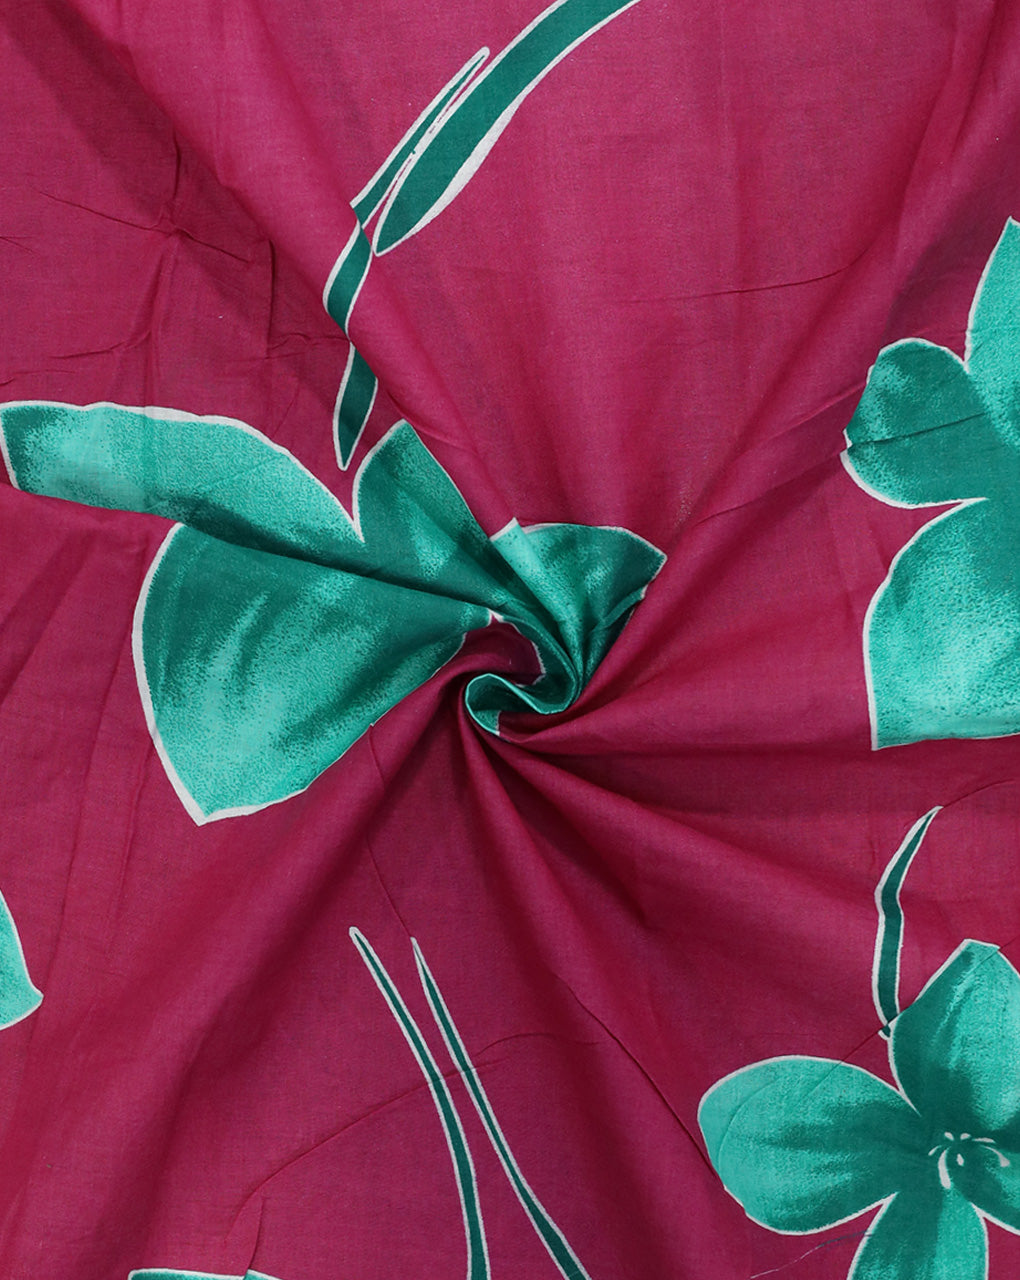 BURGUNDY & GREEN FLORAL DESIGN COTTON PRINTED FABRIC